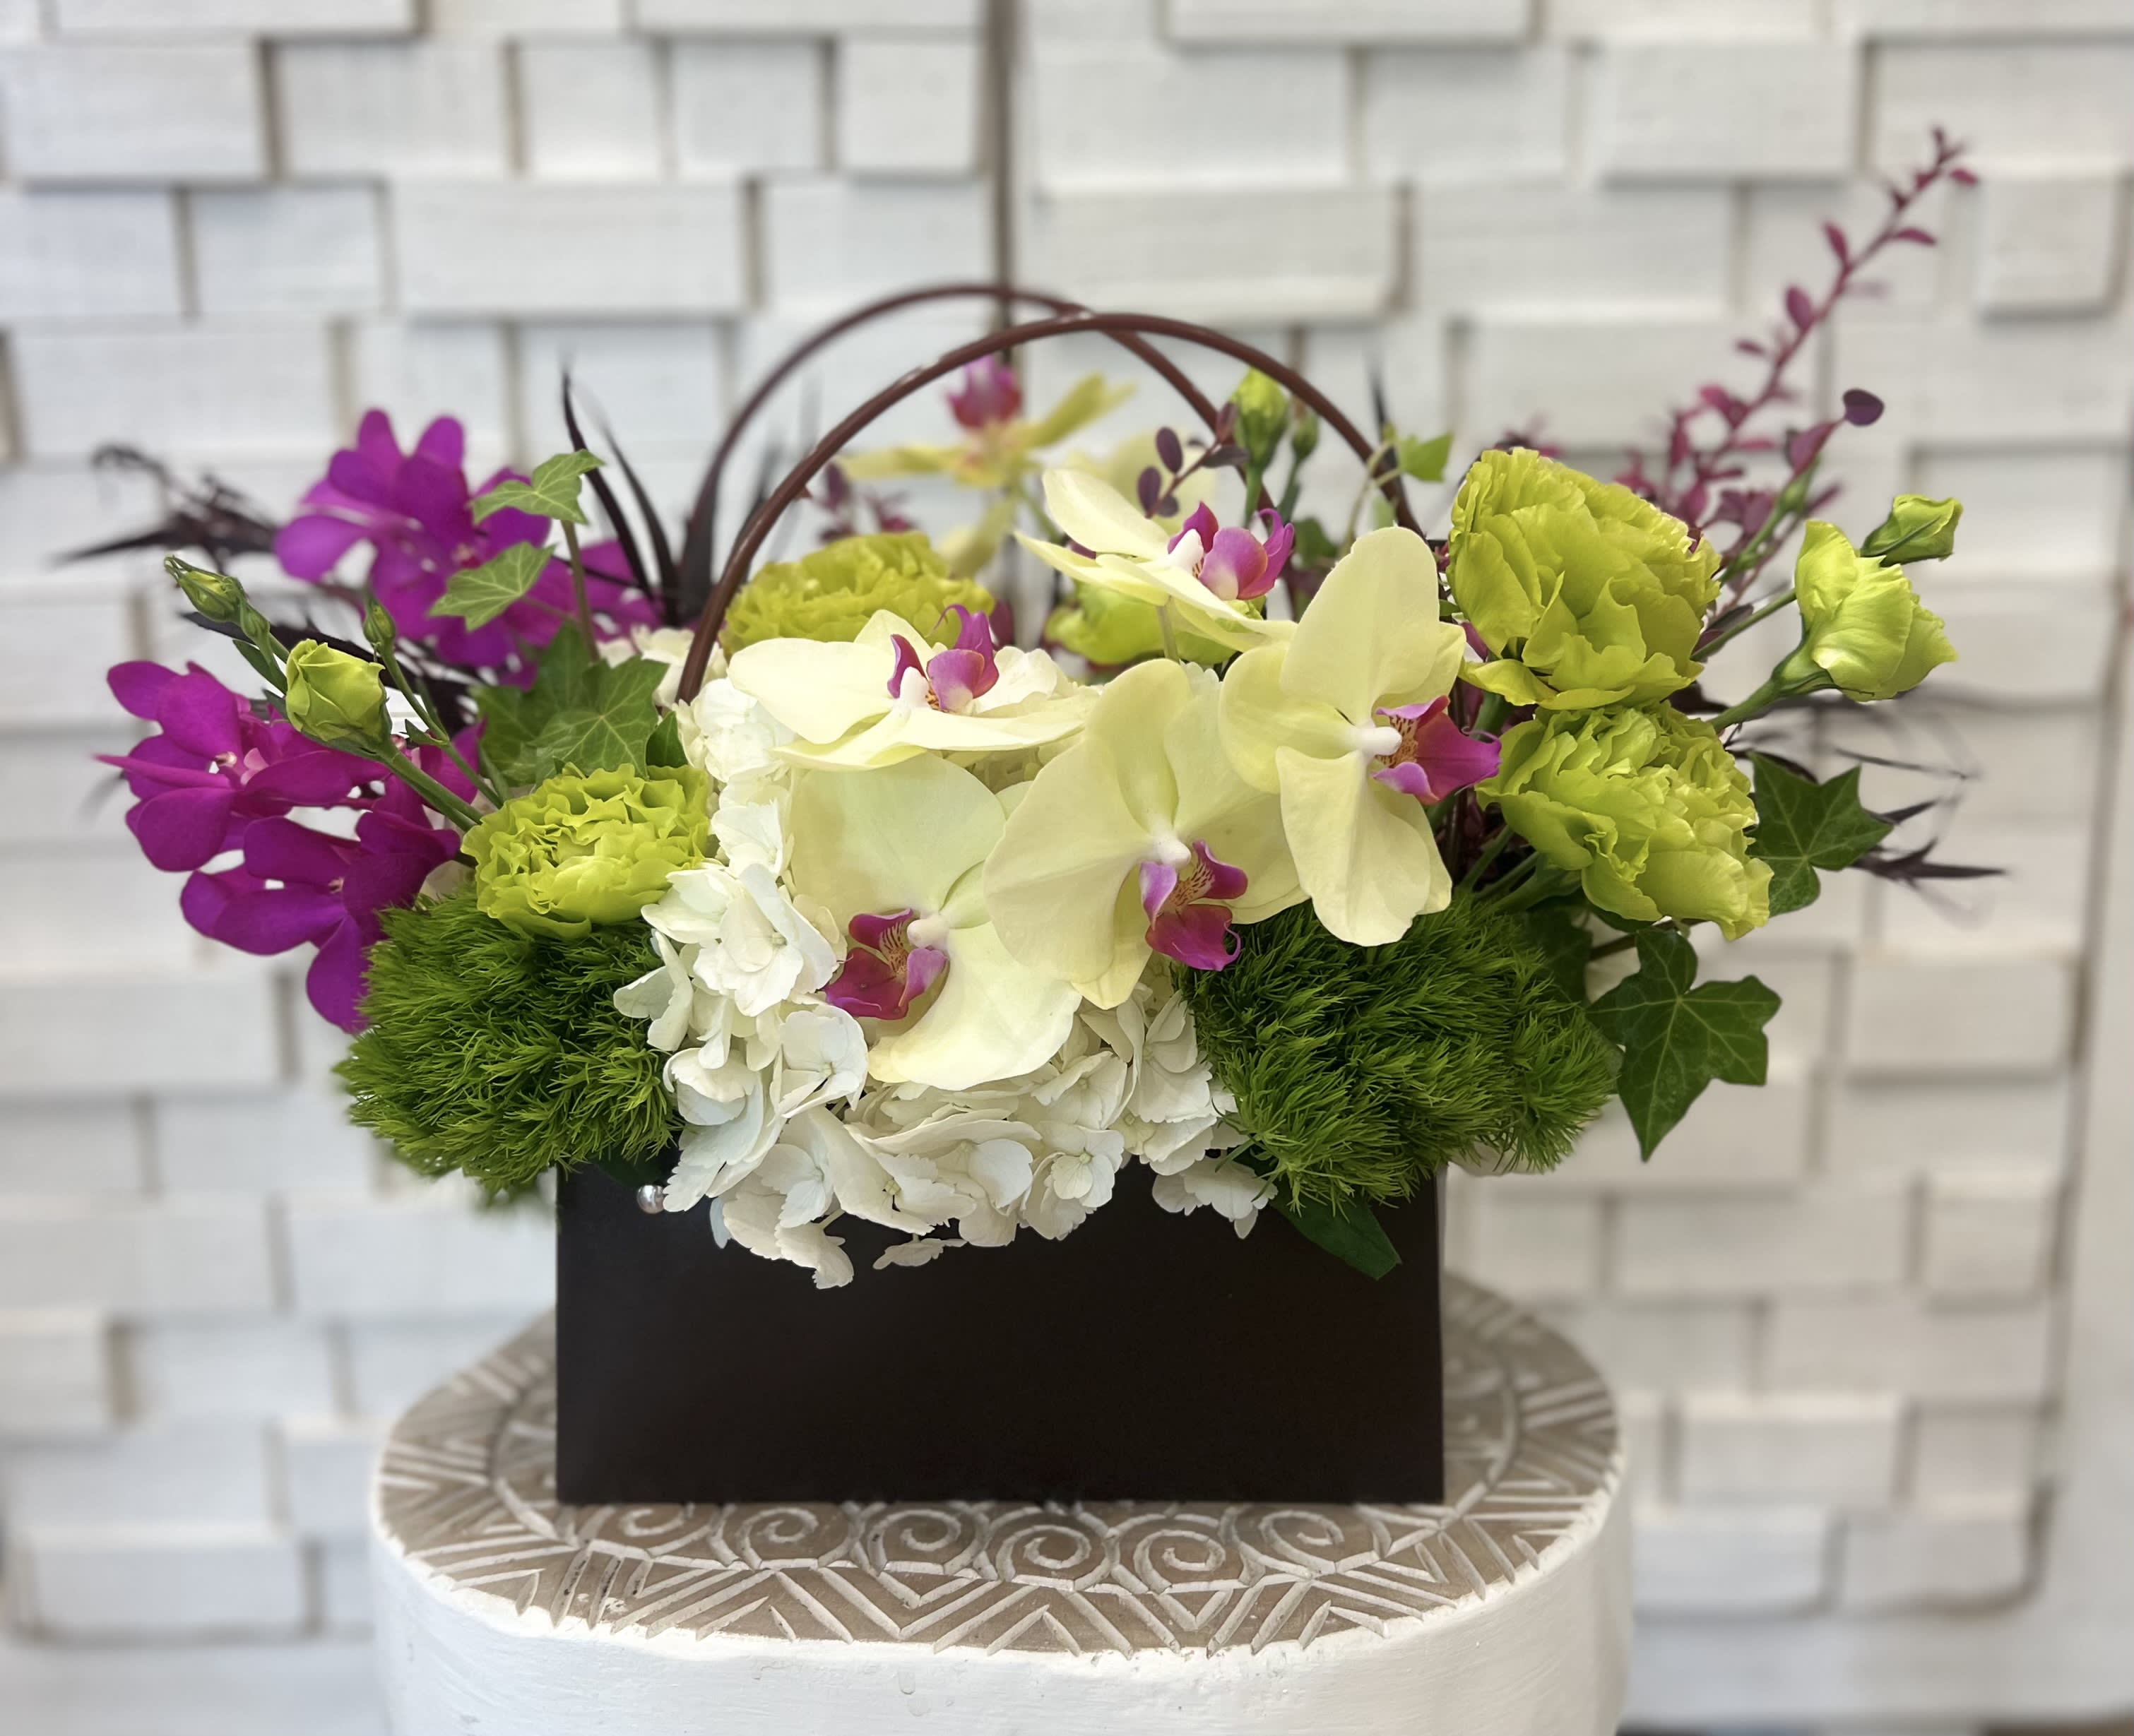 Purse Bouquet  - This lovely purse bouquet includes hydrangeas, sweetheart roses, lisianthus, orchids and more in a lovely purse!